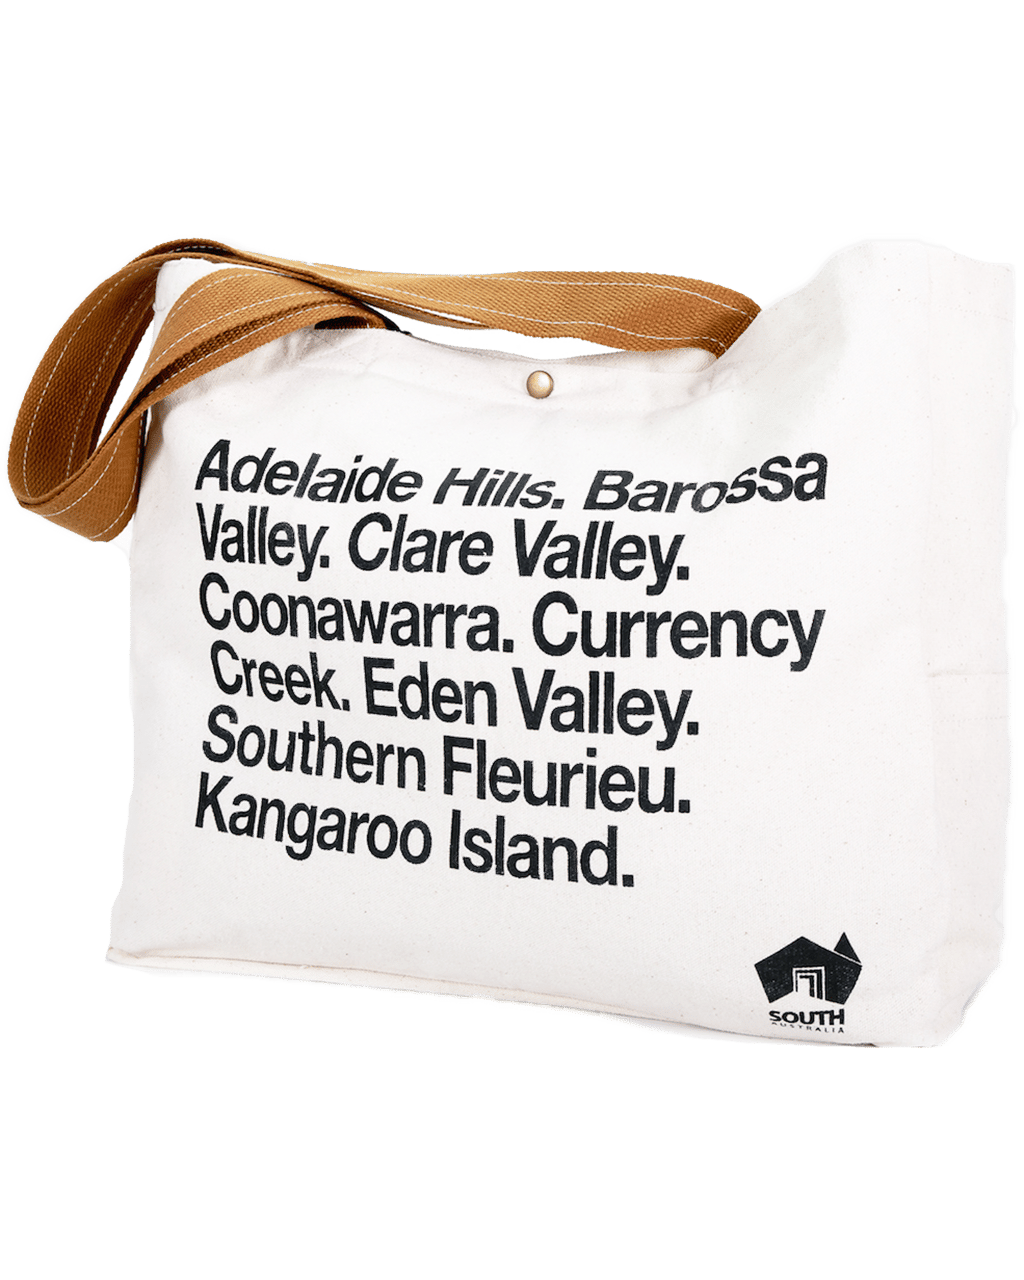 Buy Vinotopia Tote Canvas - South Australian Regions Online or You in Australia [with Same Day Delivery* & Best Offers] - Dan Murphy's